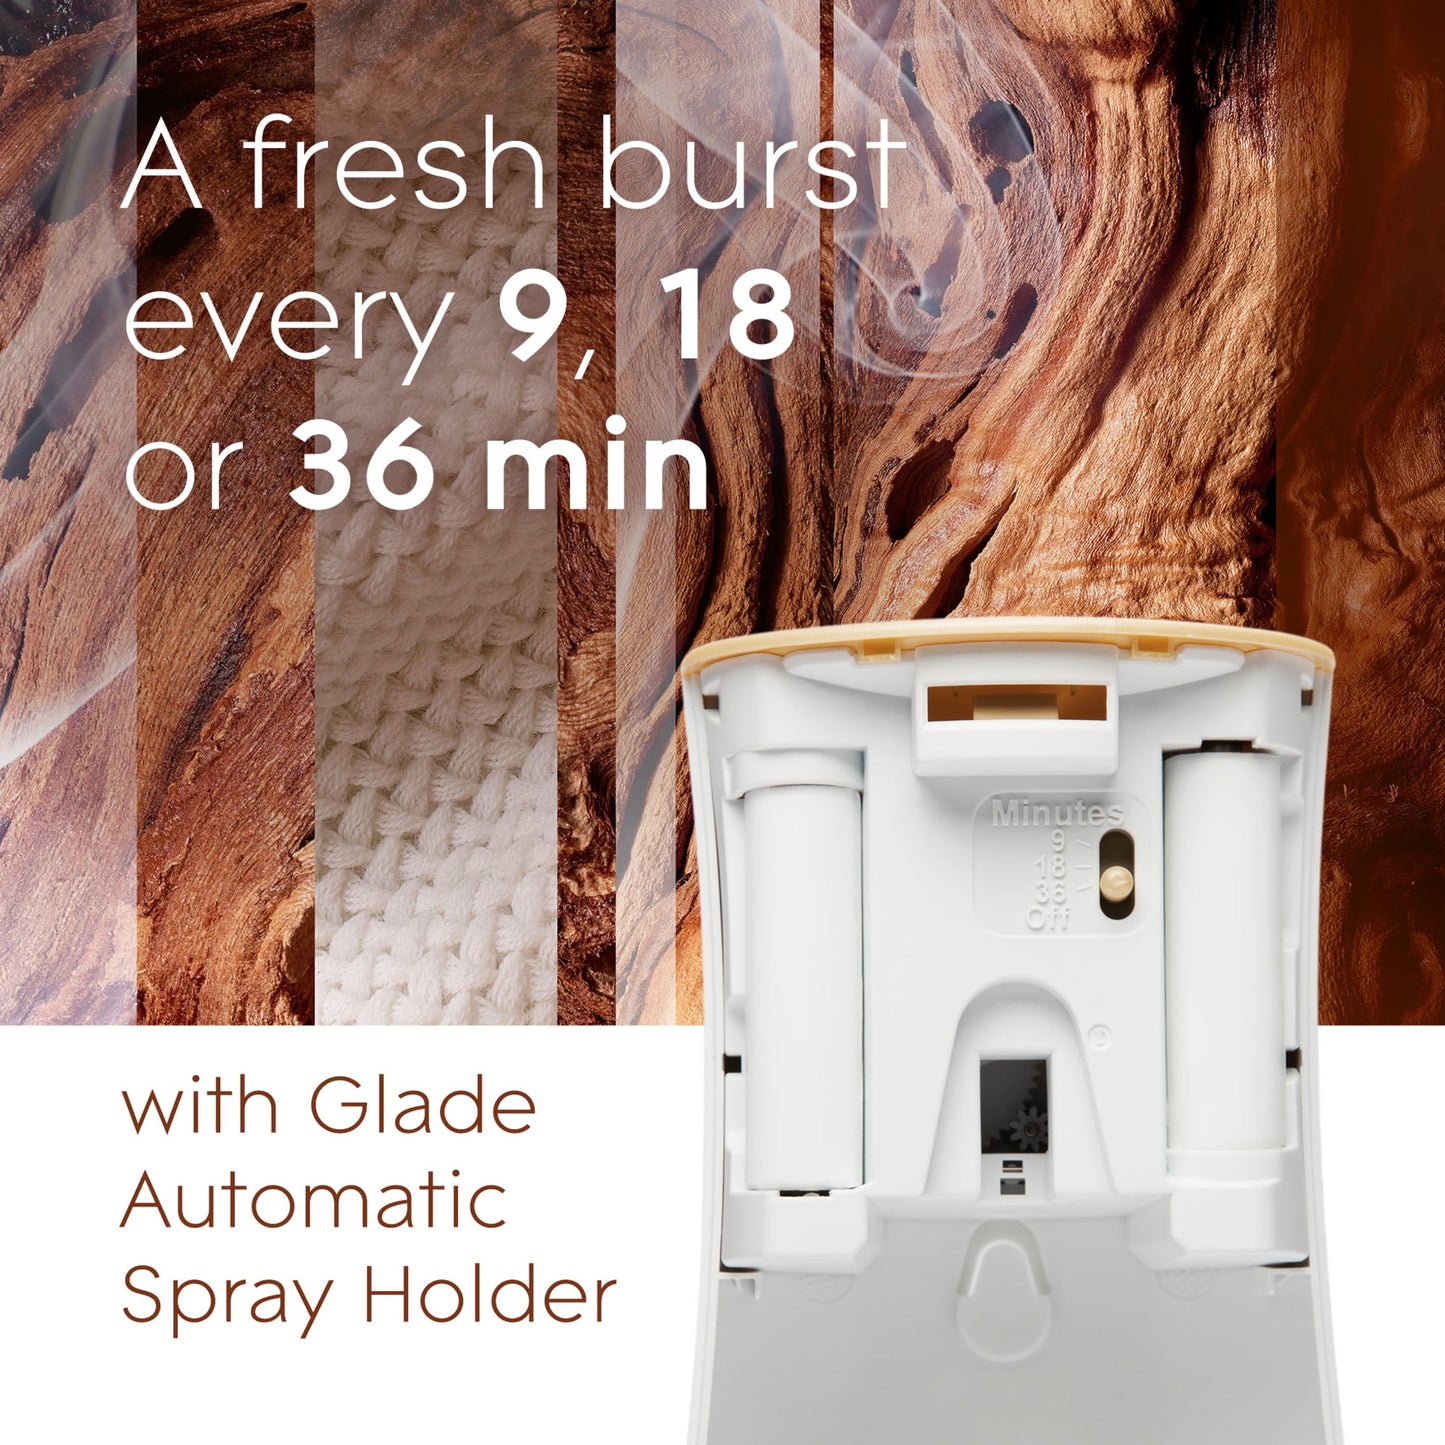 Glade Automatic Spray Refill 1 ct, Cashmere Woods, 6.2 oz. Total, Air Freshener Infused with Essential Oils